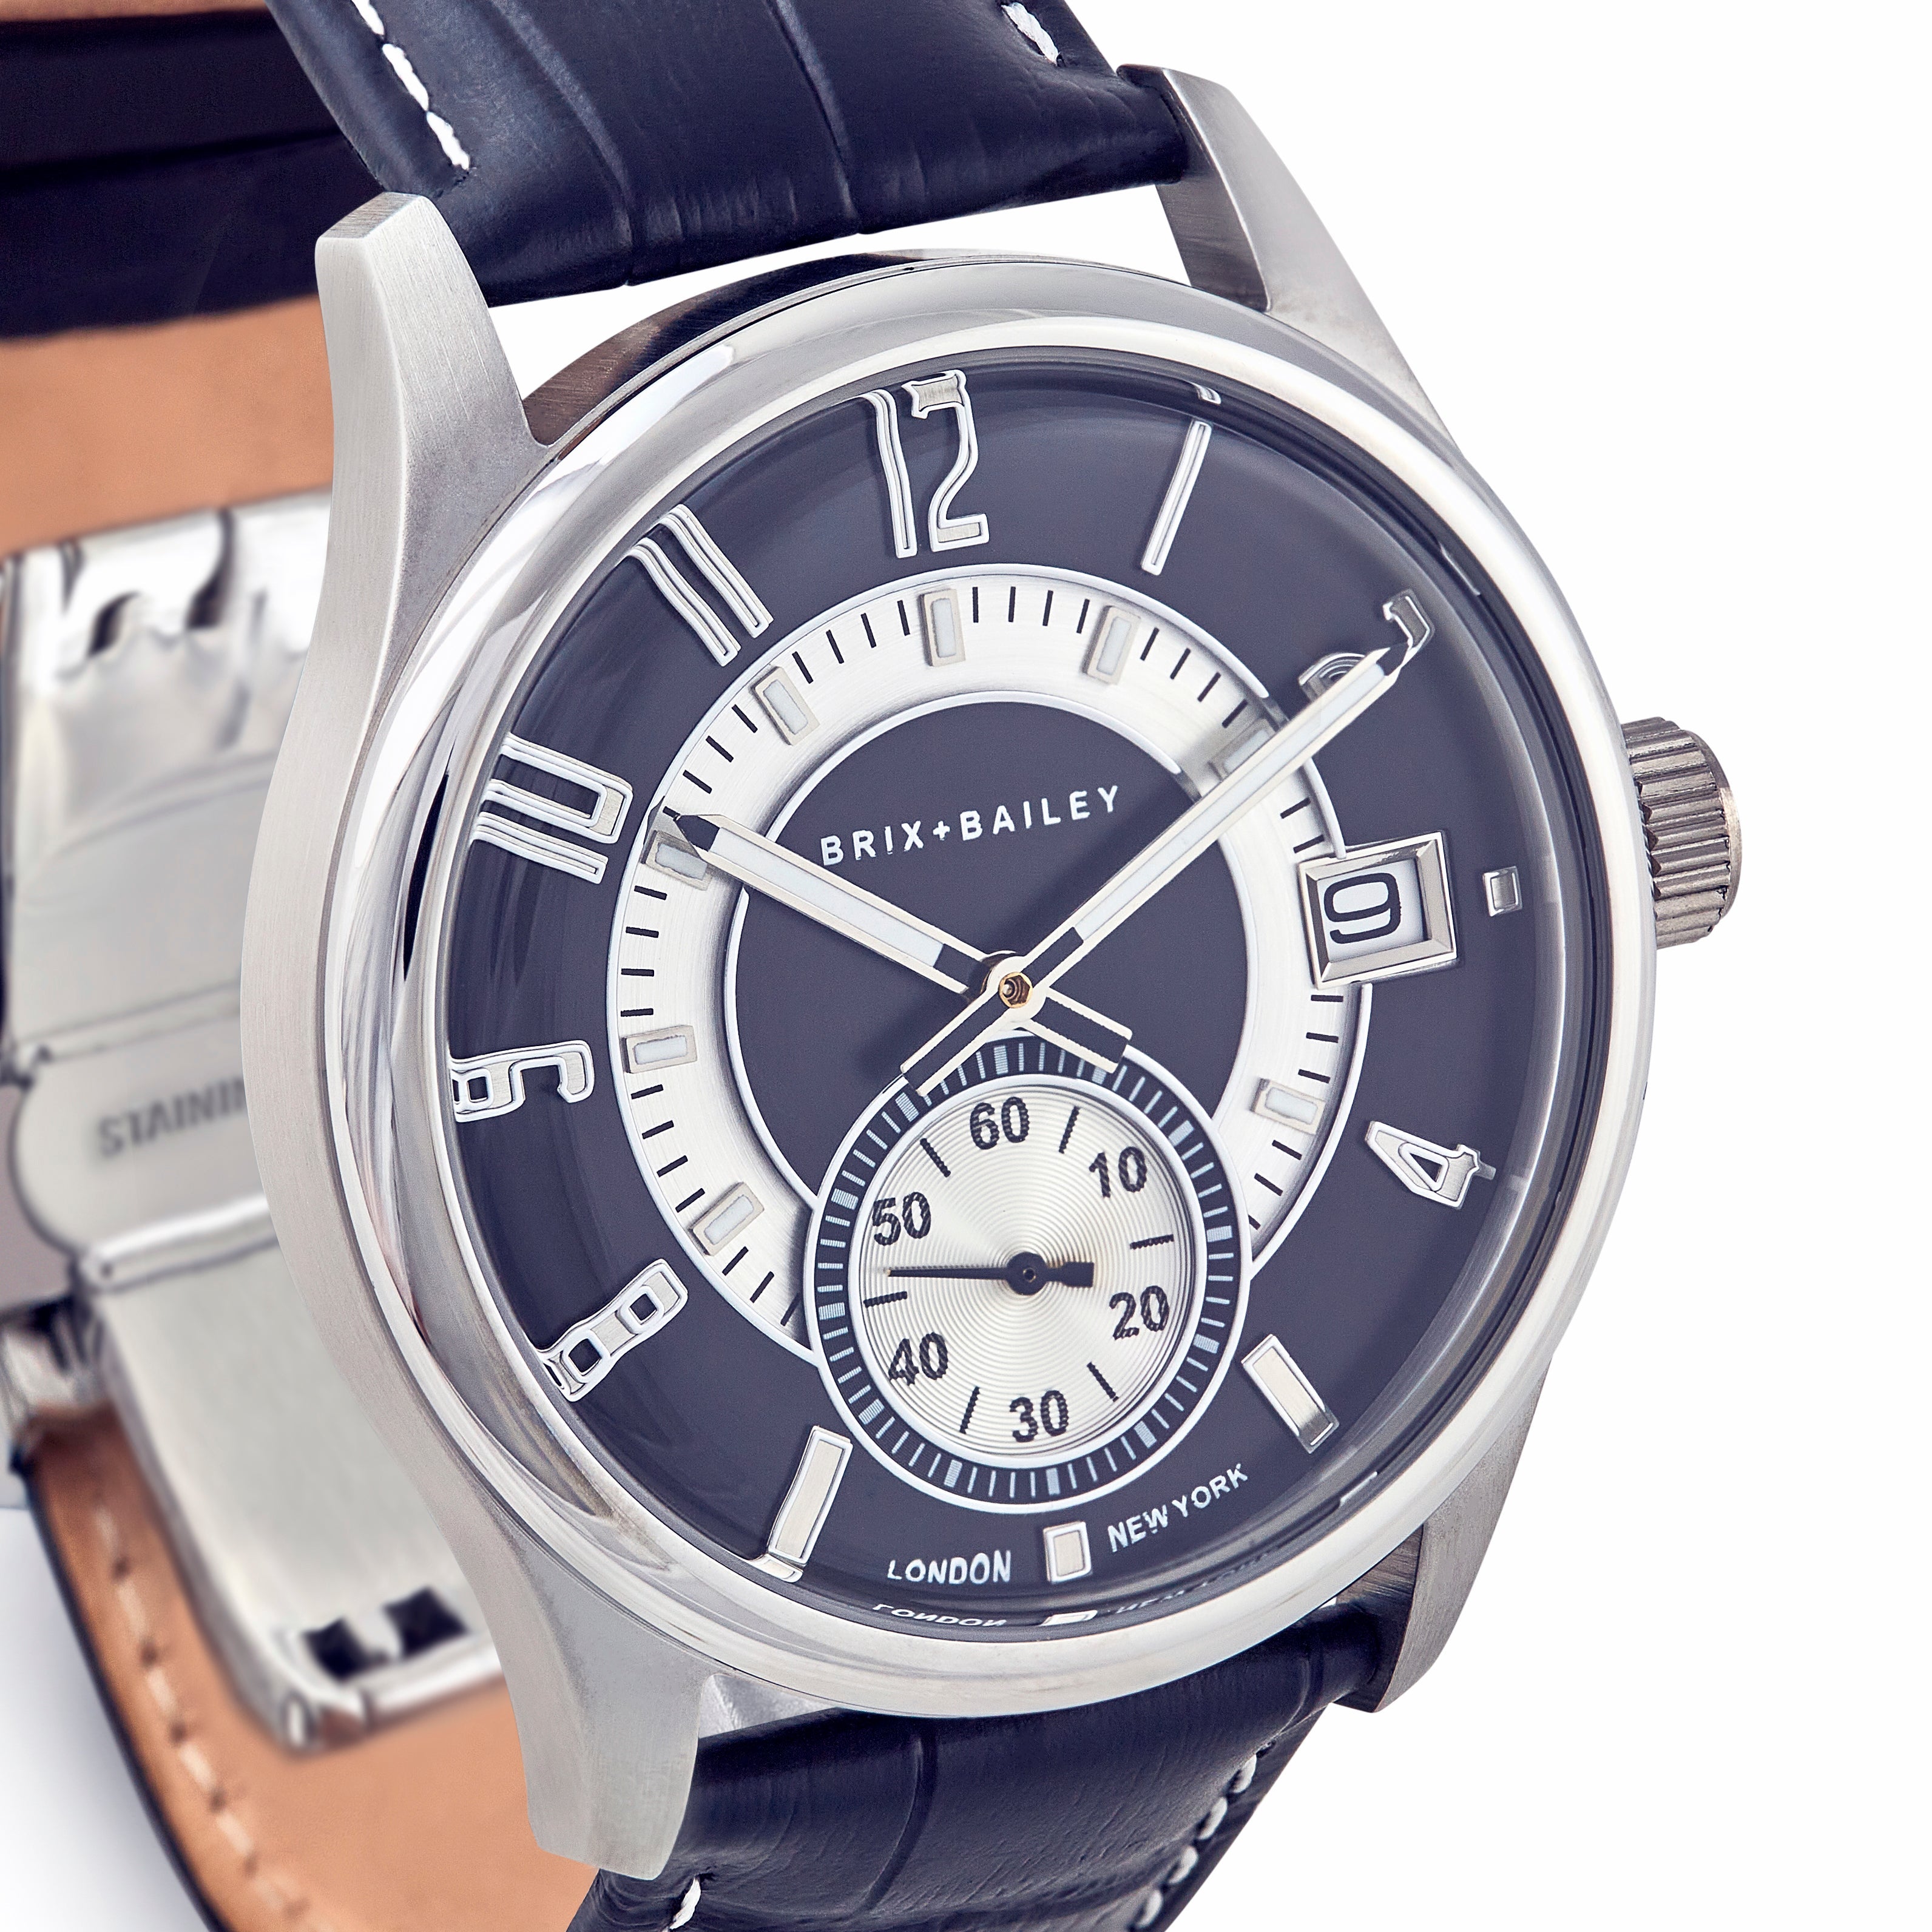 The Brix + Bailey Price Watch Form 3